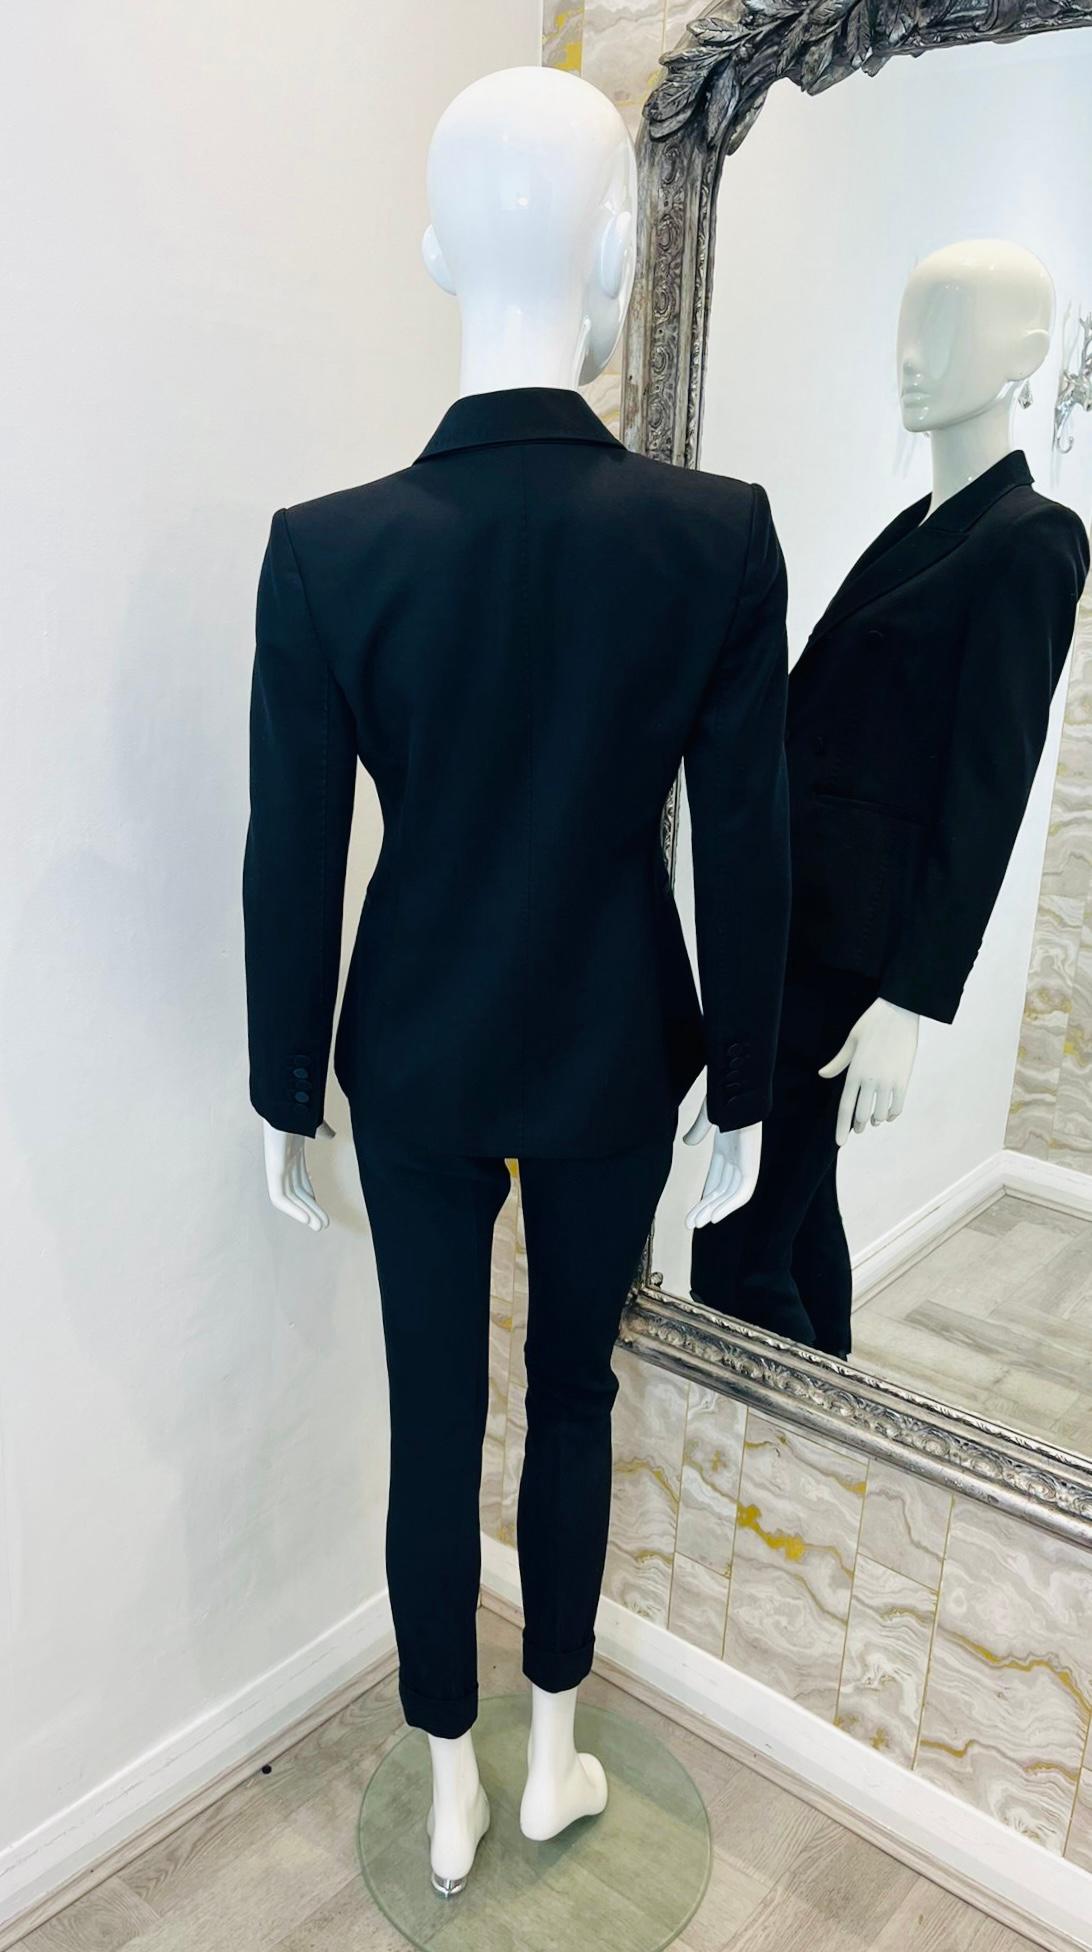 Tom Ford Tailored Two-Piece Suit In Excellent Condition For Sale In London, GB